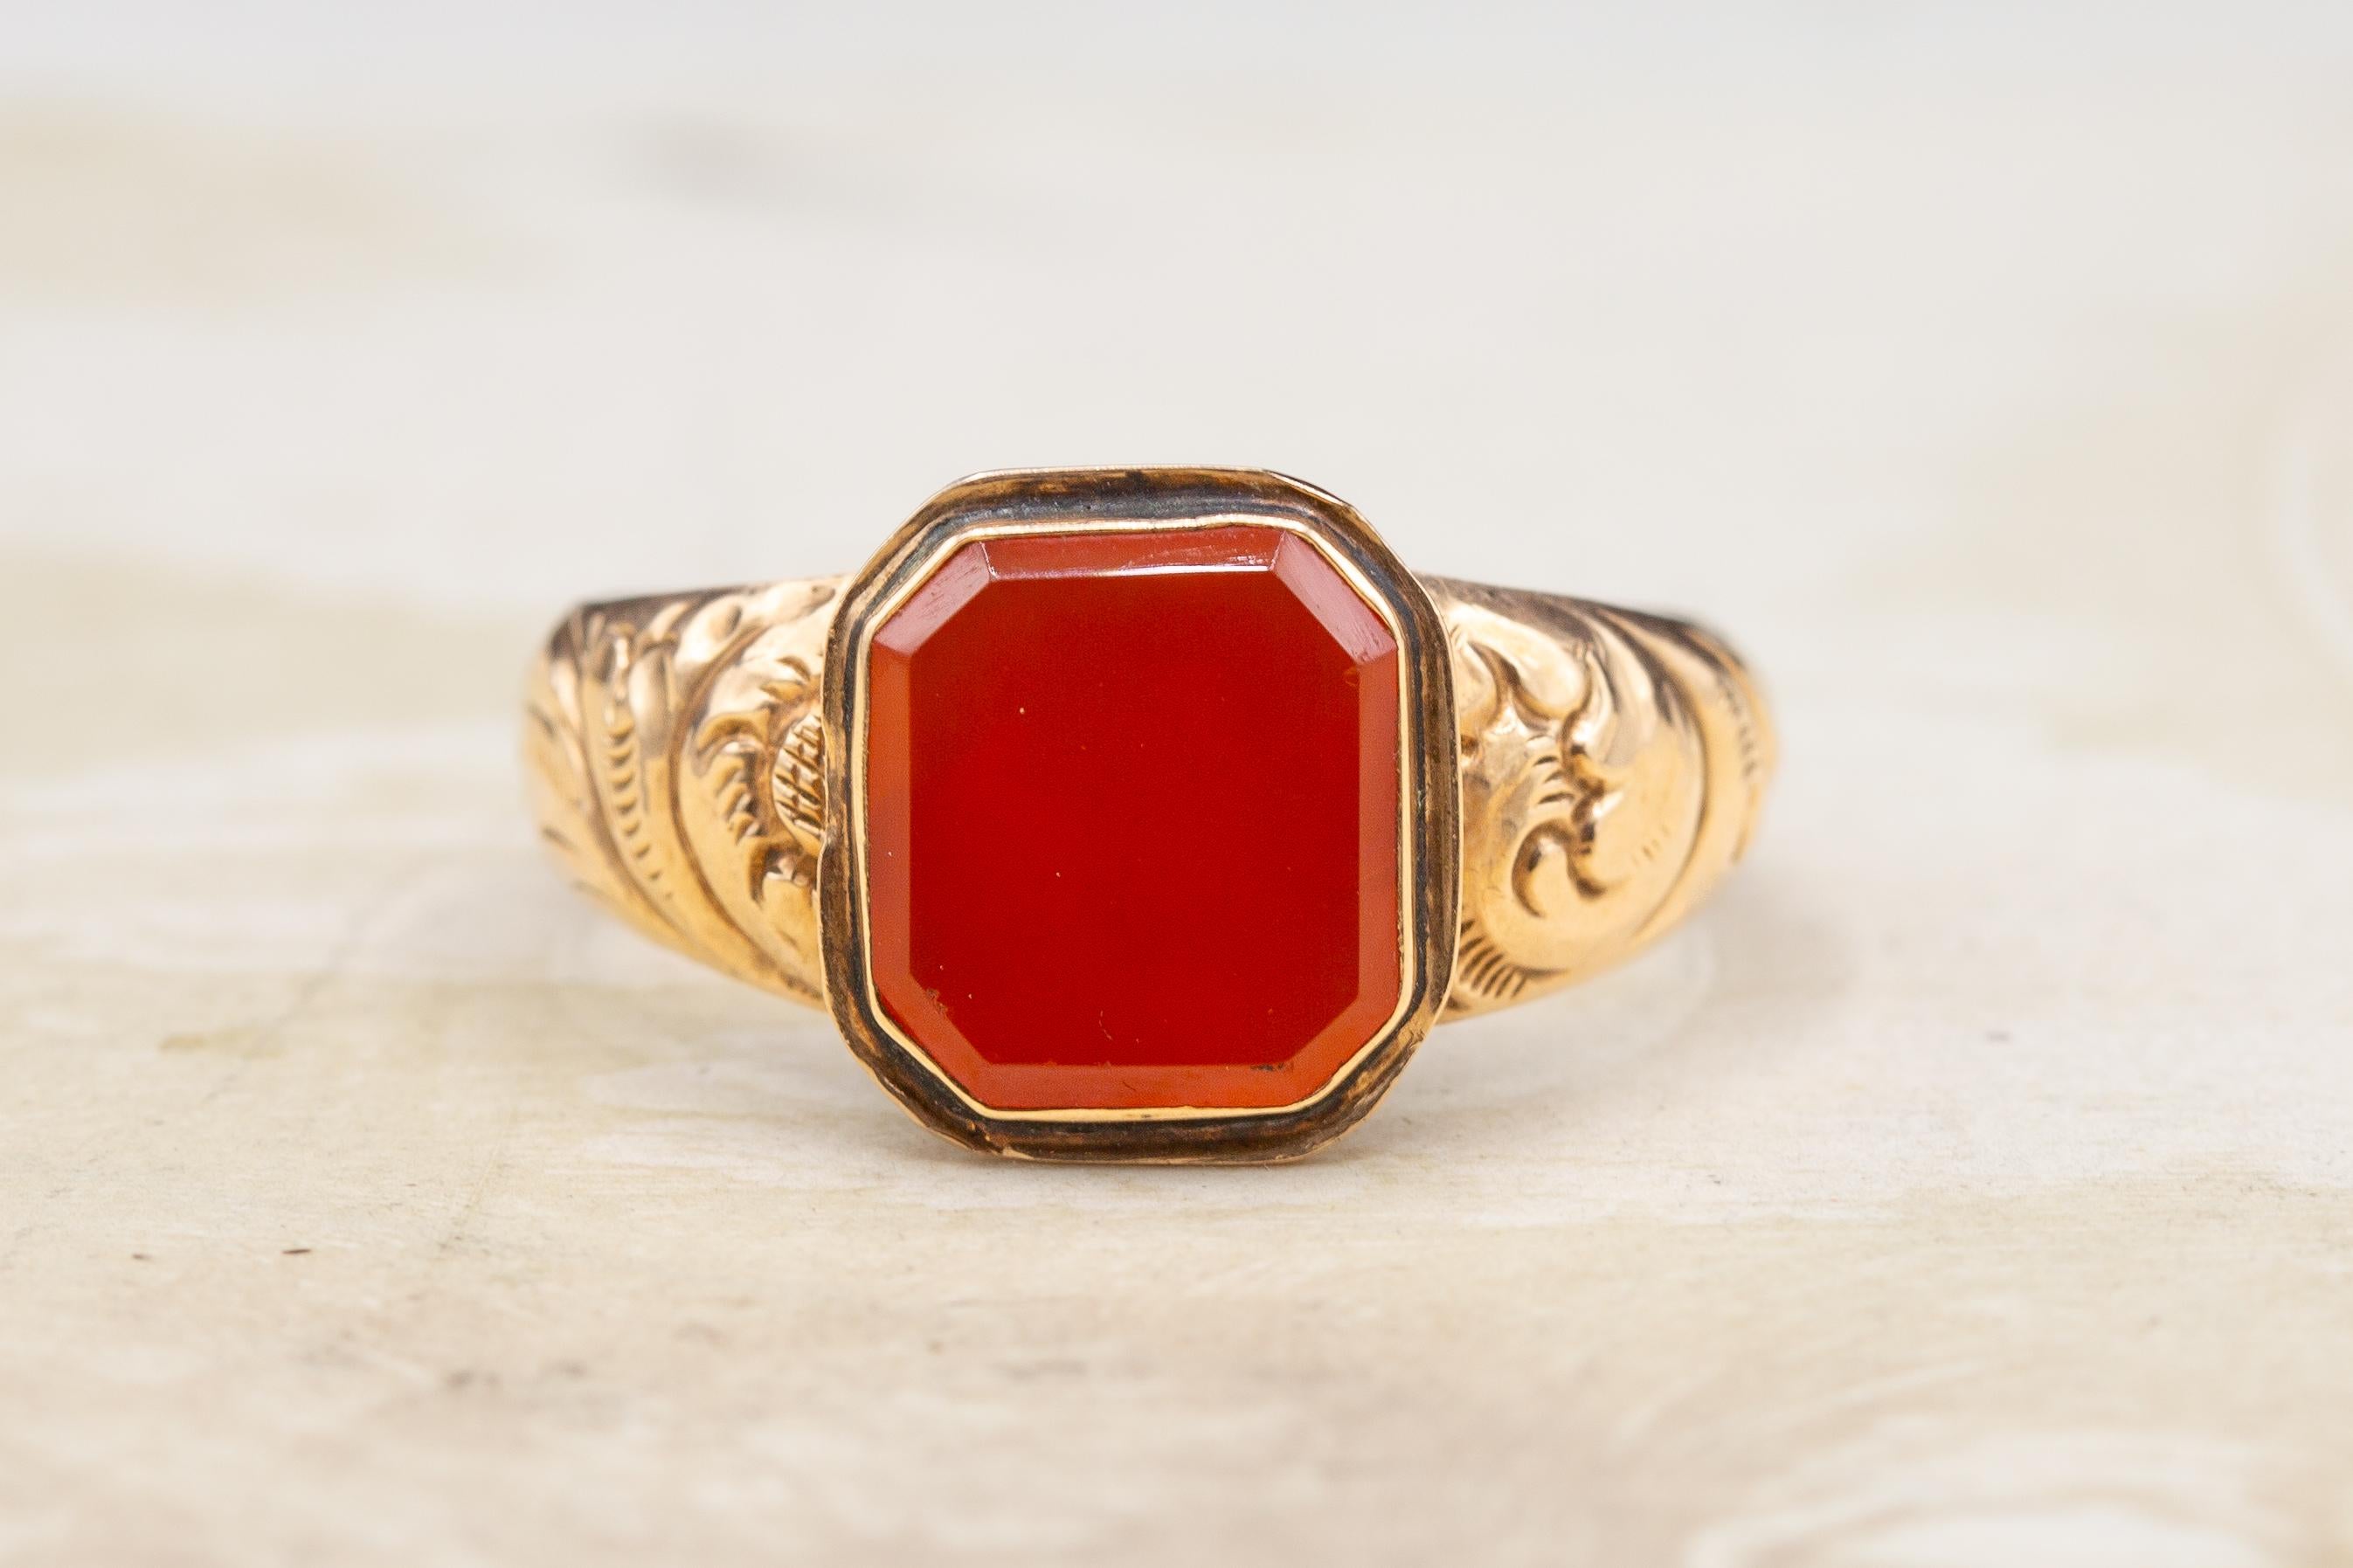 A large antique English Georgian era gentleman’s gold signet ring, circa 1830. 

In the centre there is a flat-cut and bezel-set octagonal carnelian gemstone. These stones in these types of rings would typically be engraved with a coat of arms or